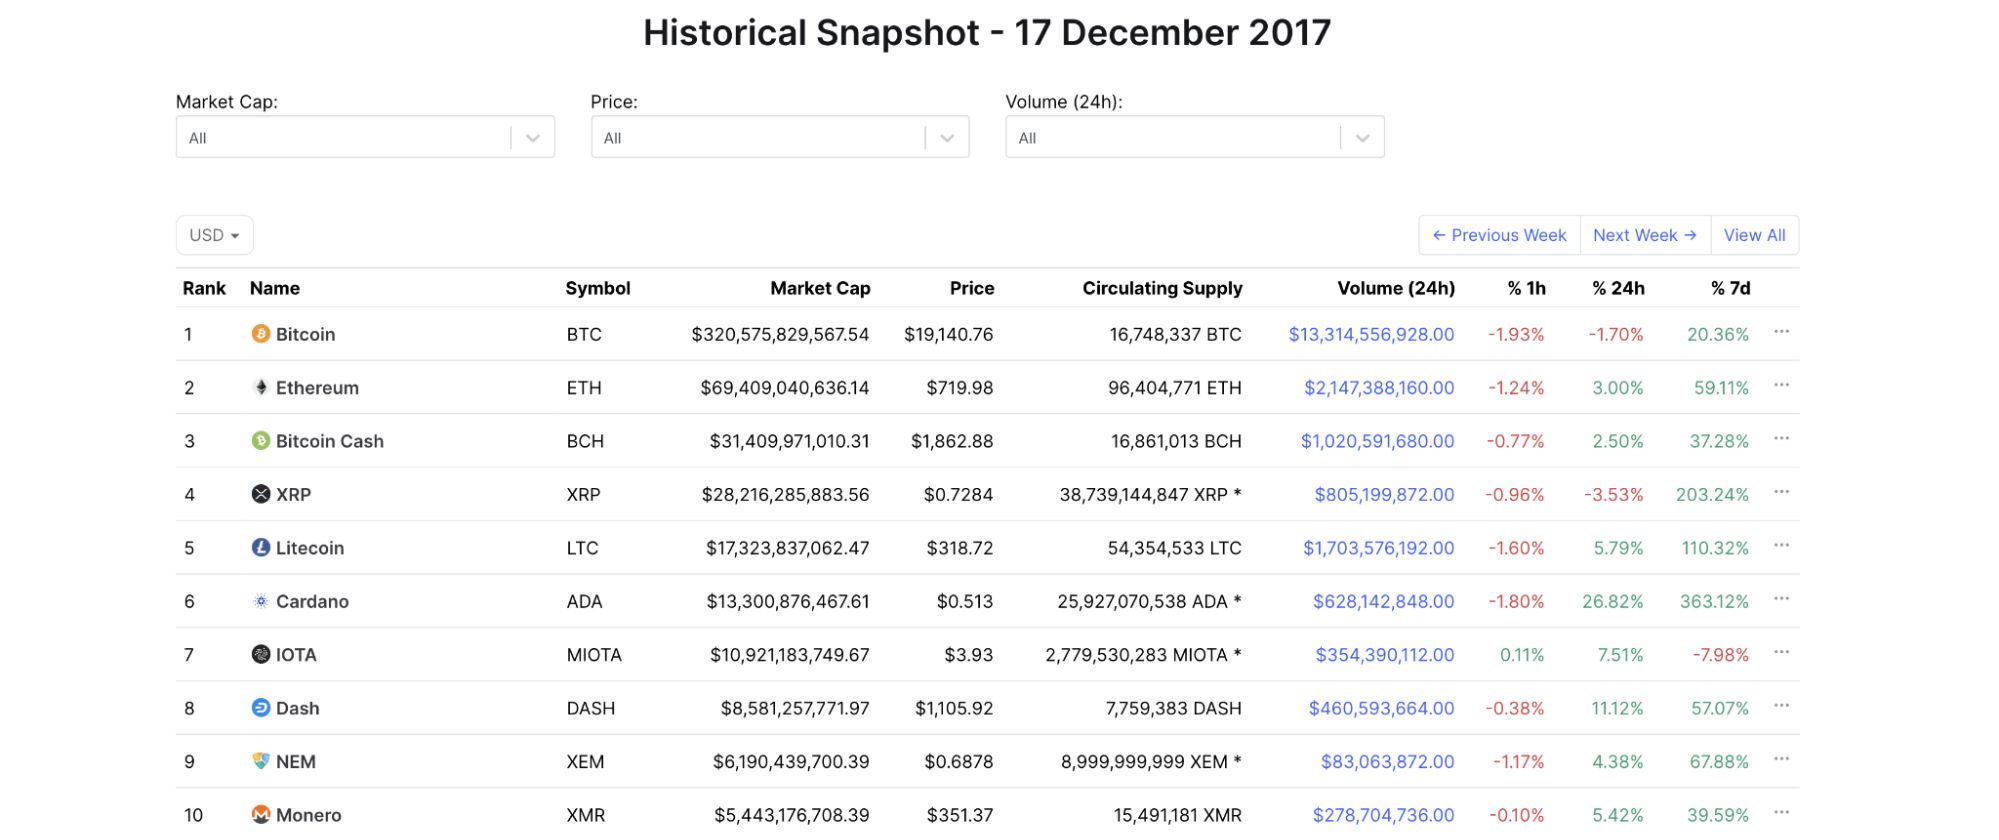 Historical snapshot of cryptocurrencies ranked by market capitalization